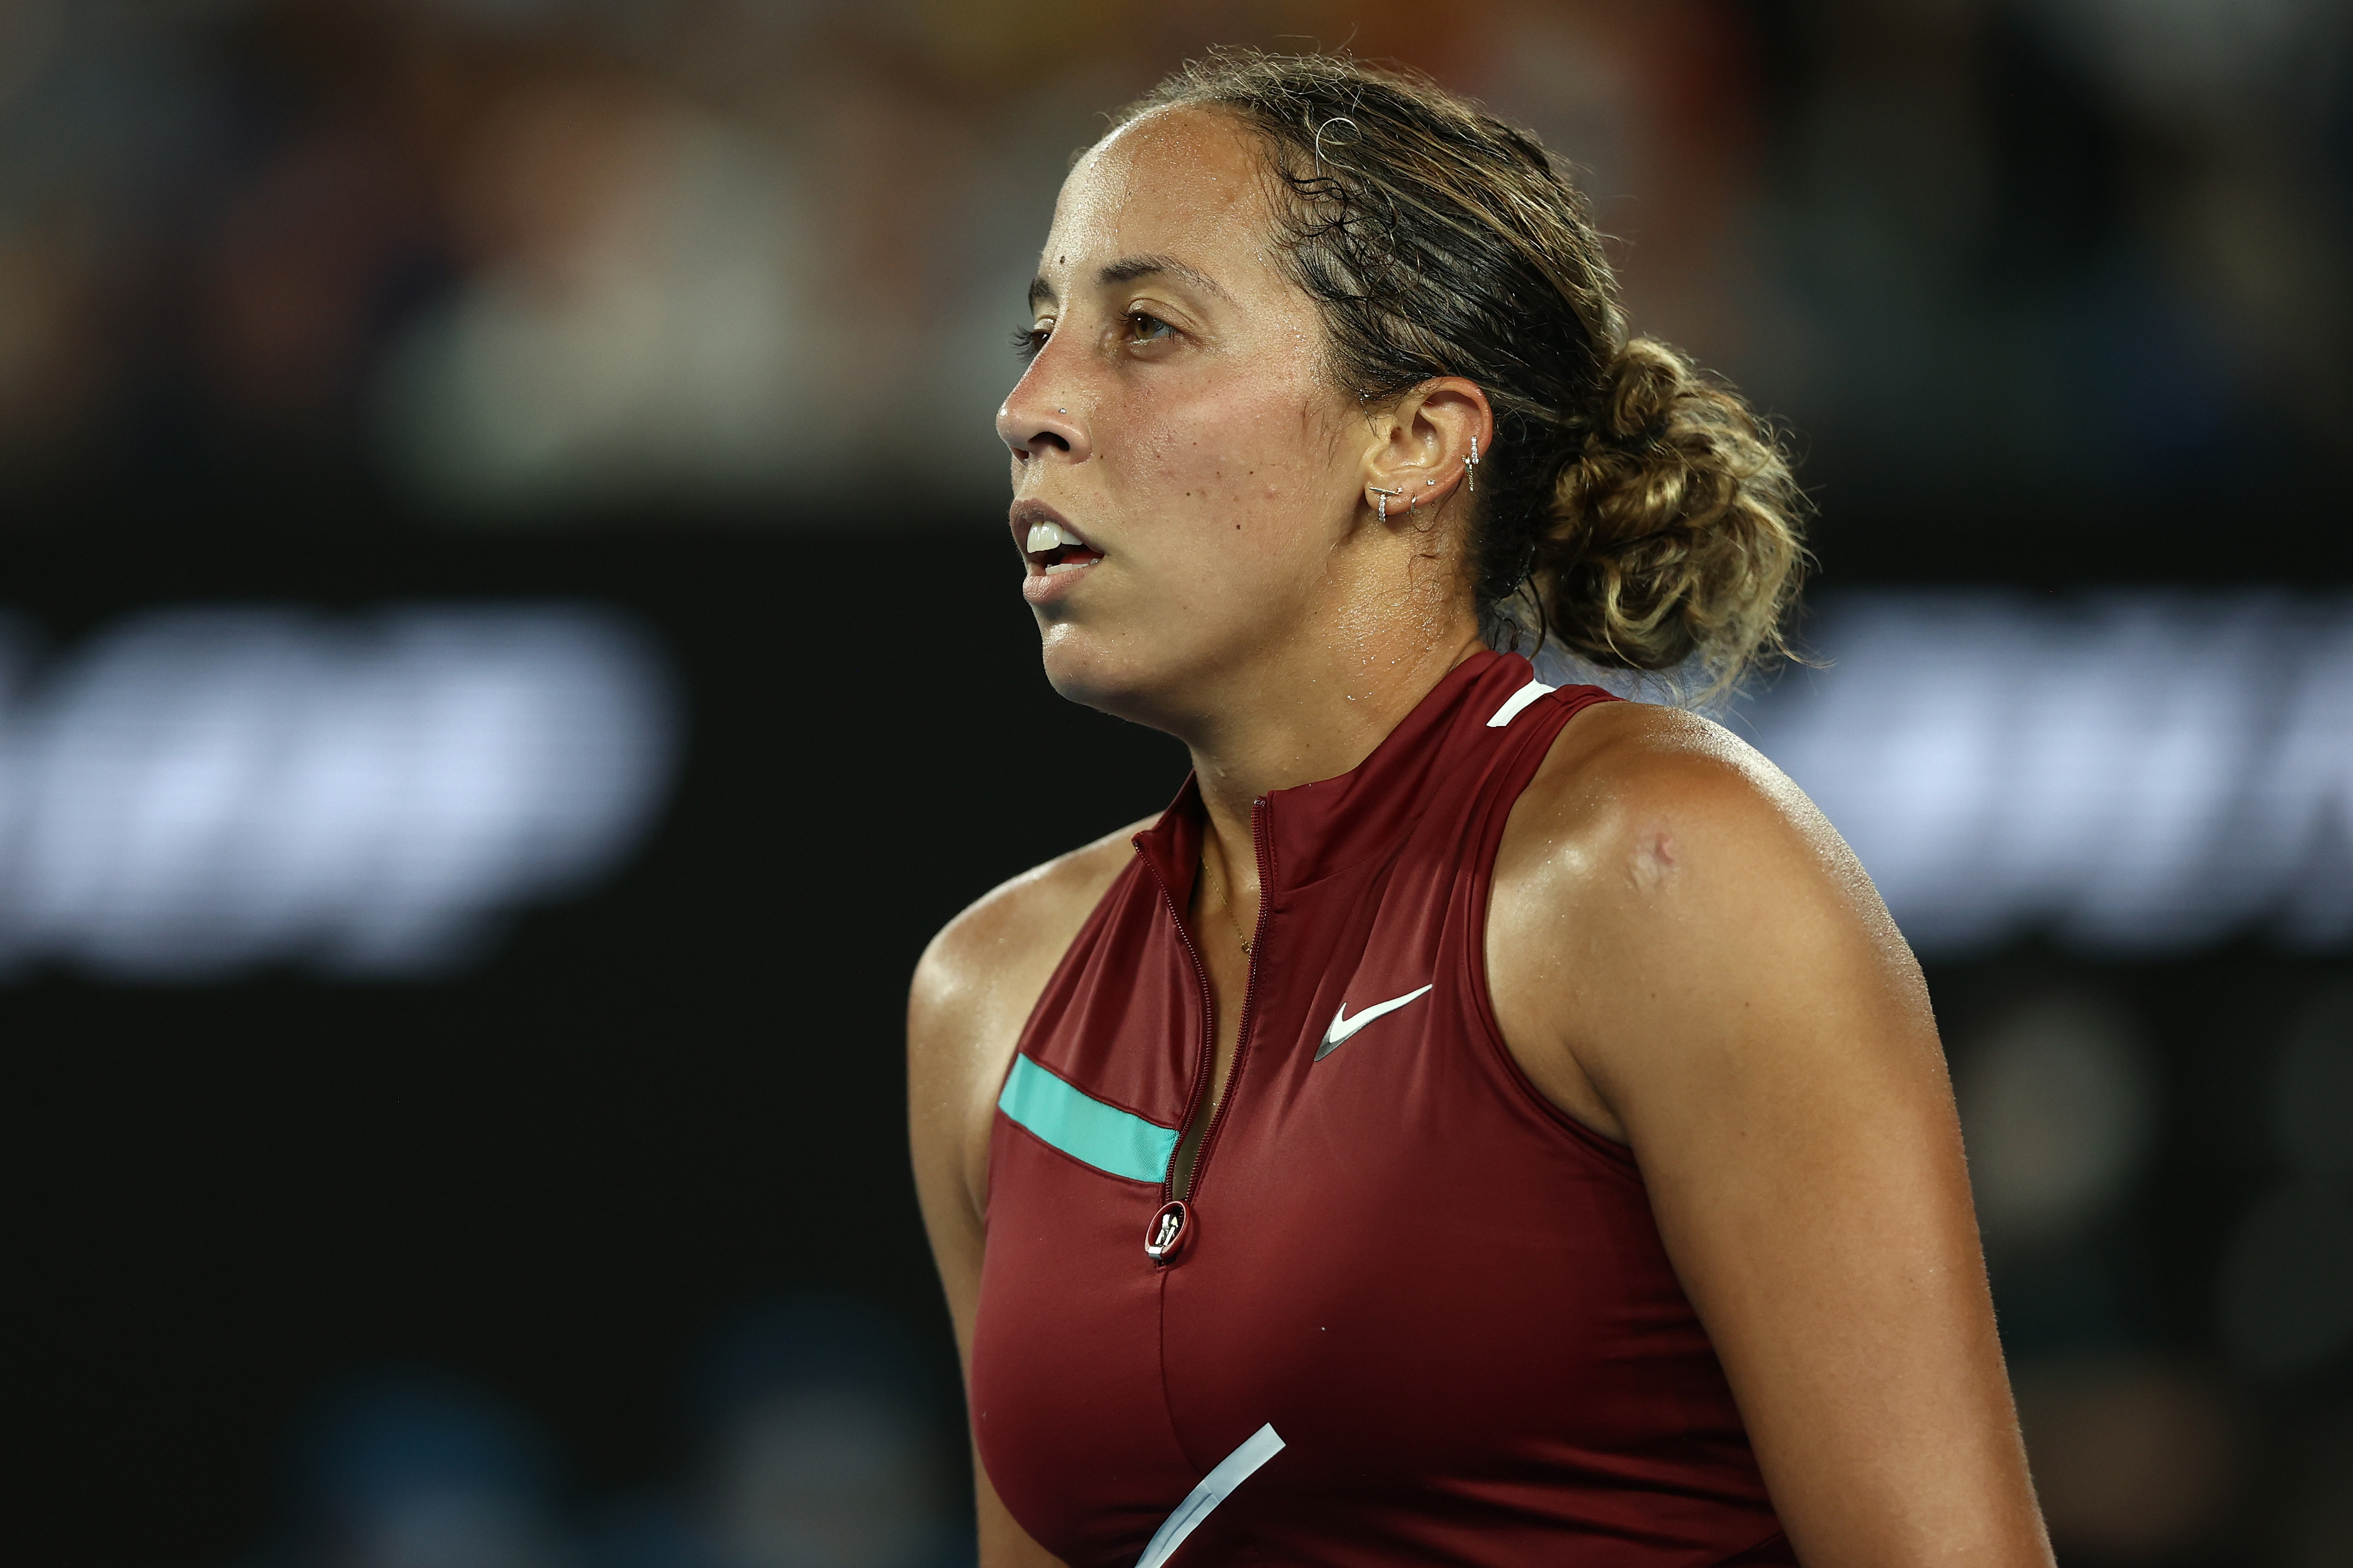 Madison Keys wants to build on Aussie run: "I'm in a really good ...